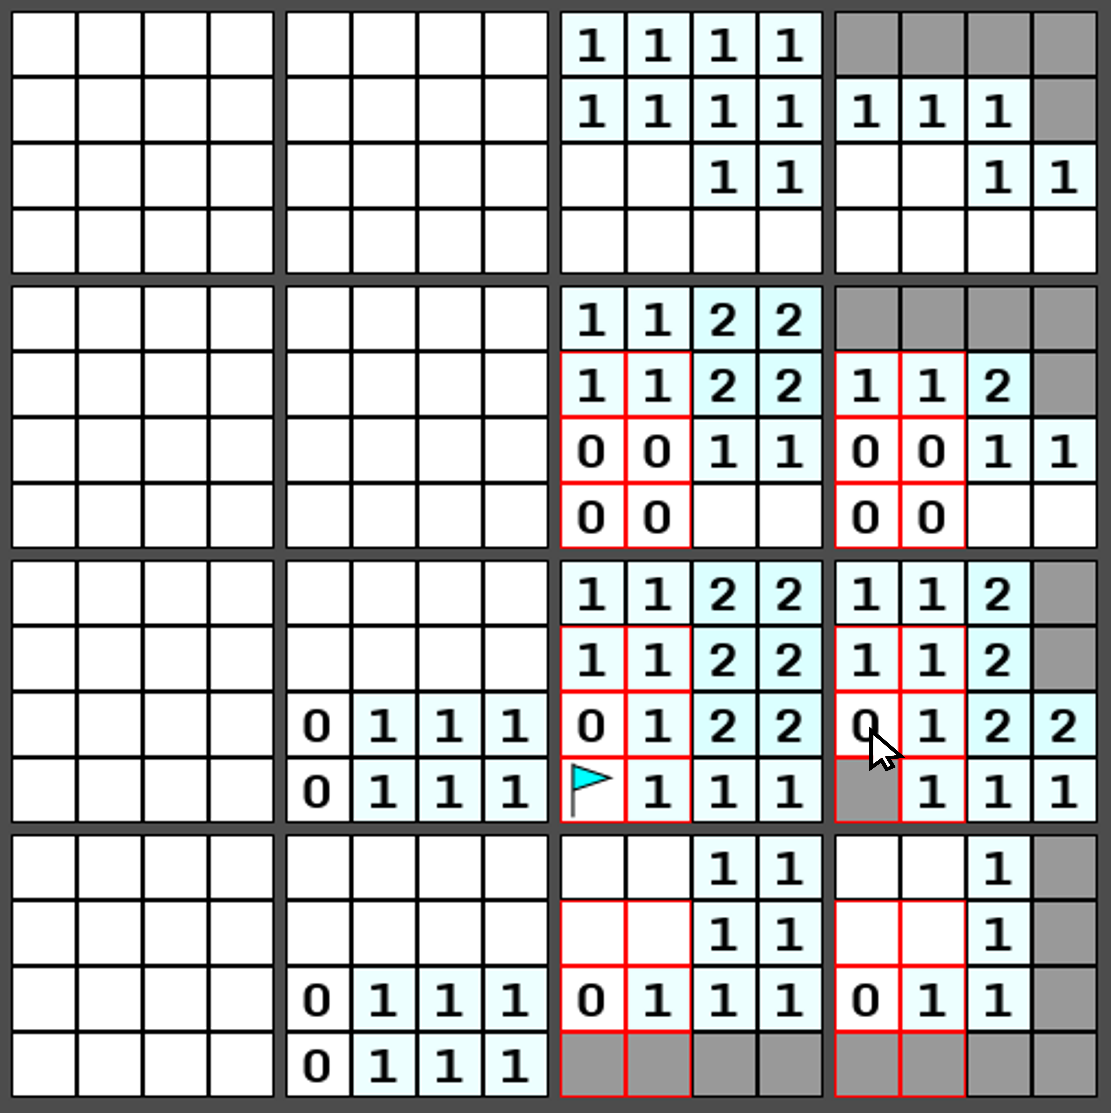 Game of 4DMinesweeper